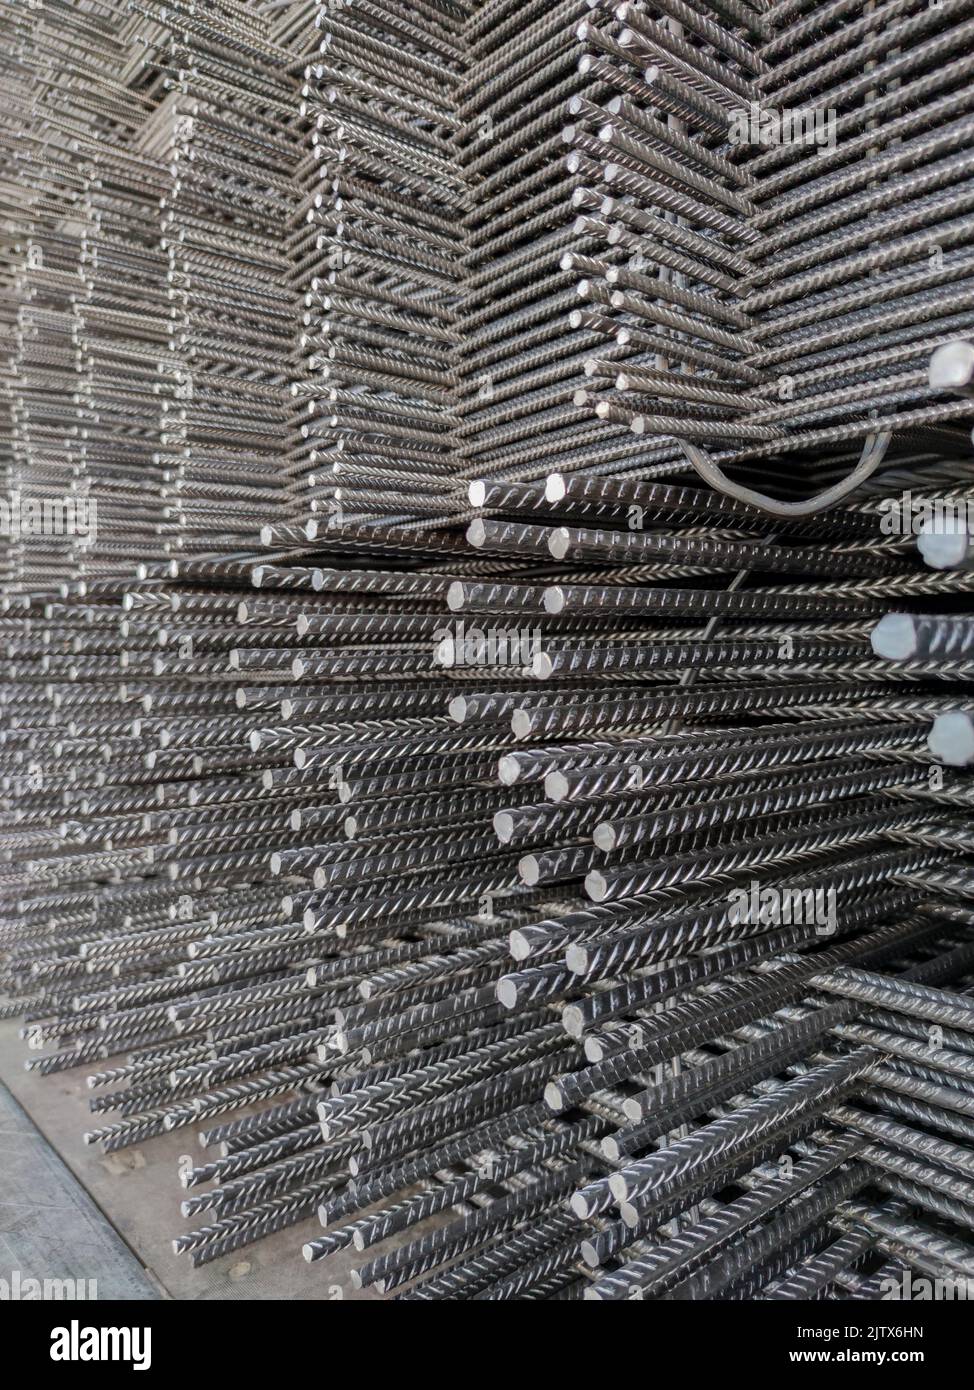 Reinforcing bars framework for armored concrete construction. Layers stacked and stowed for transport. Stock Photo